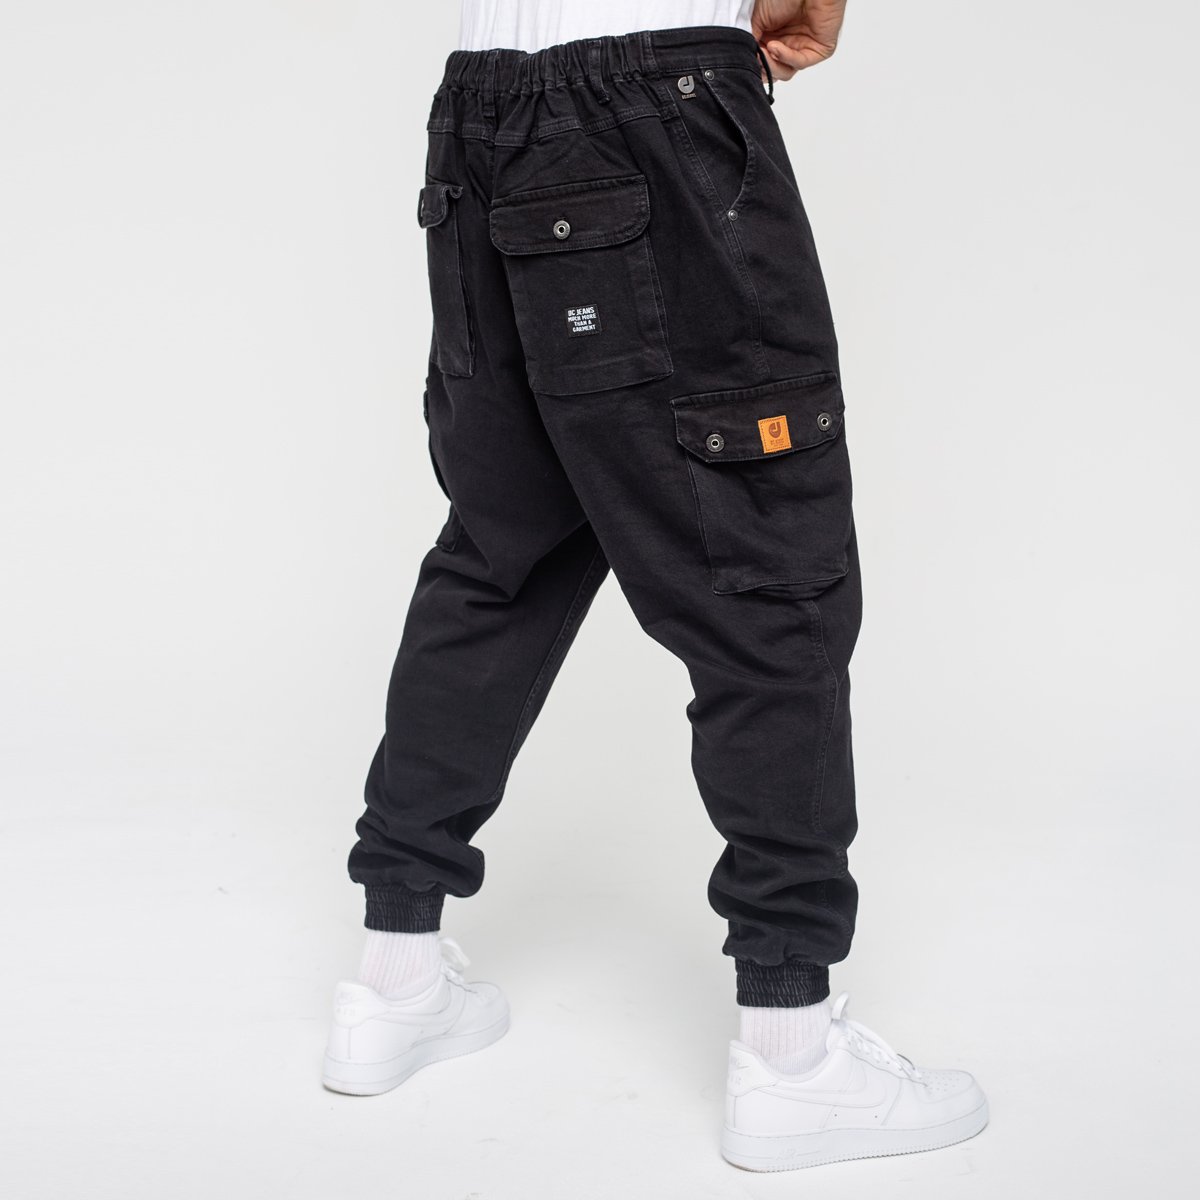 Jeans Cargo Pants Black - DCjeans saroual and clothing